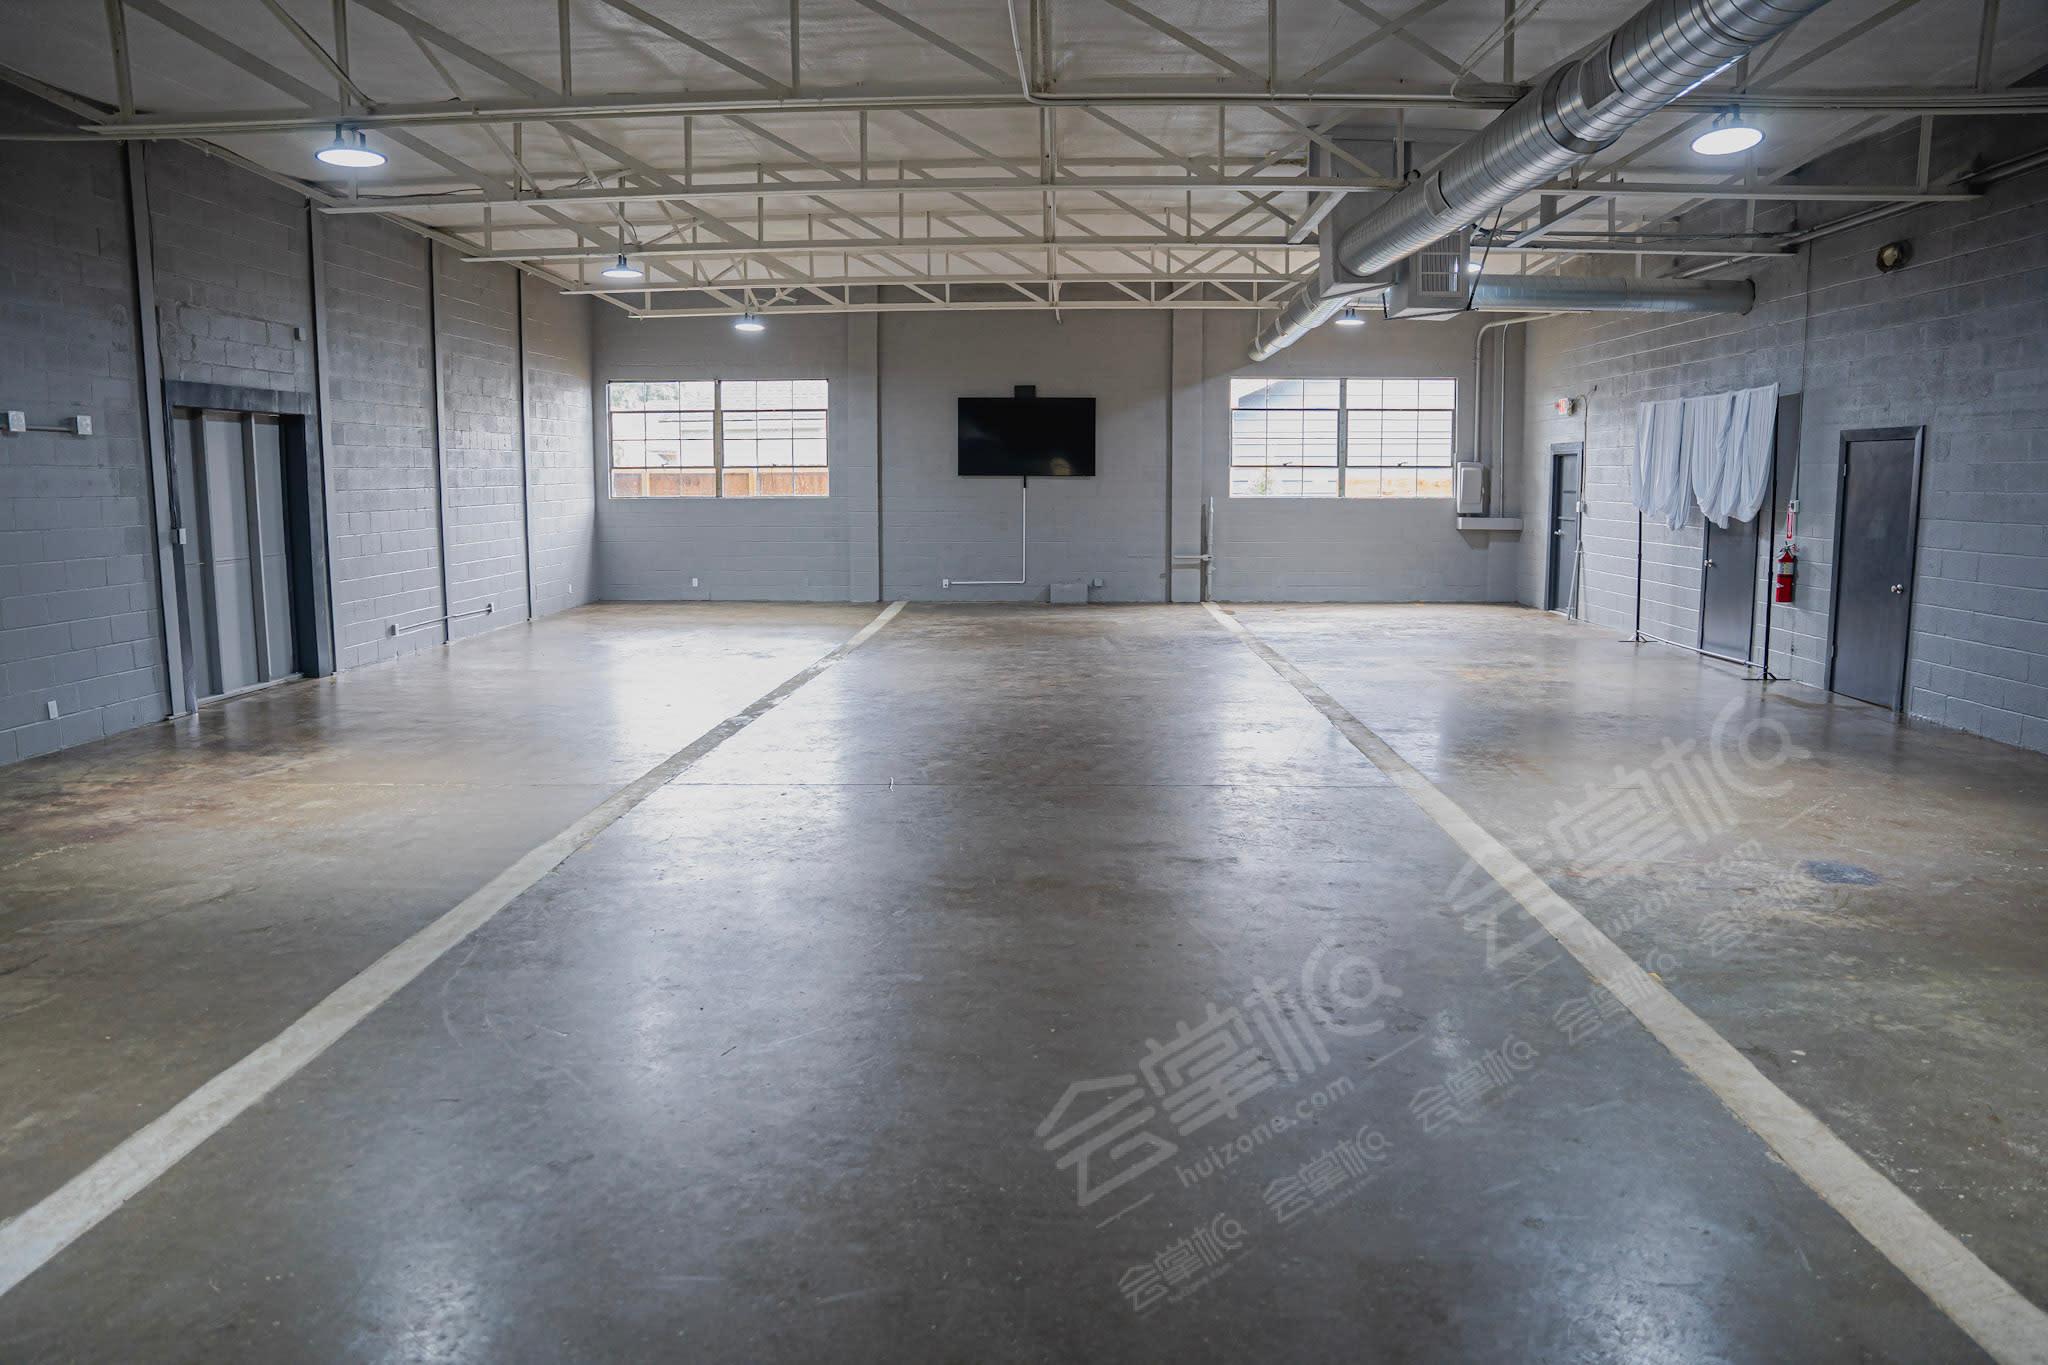 Downtown Industrial Studio with Natural Light